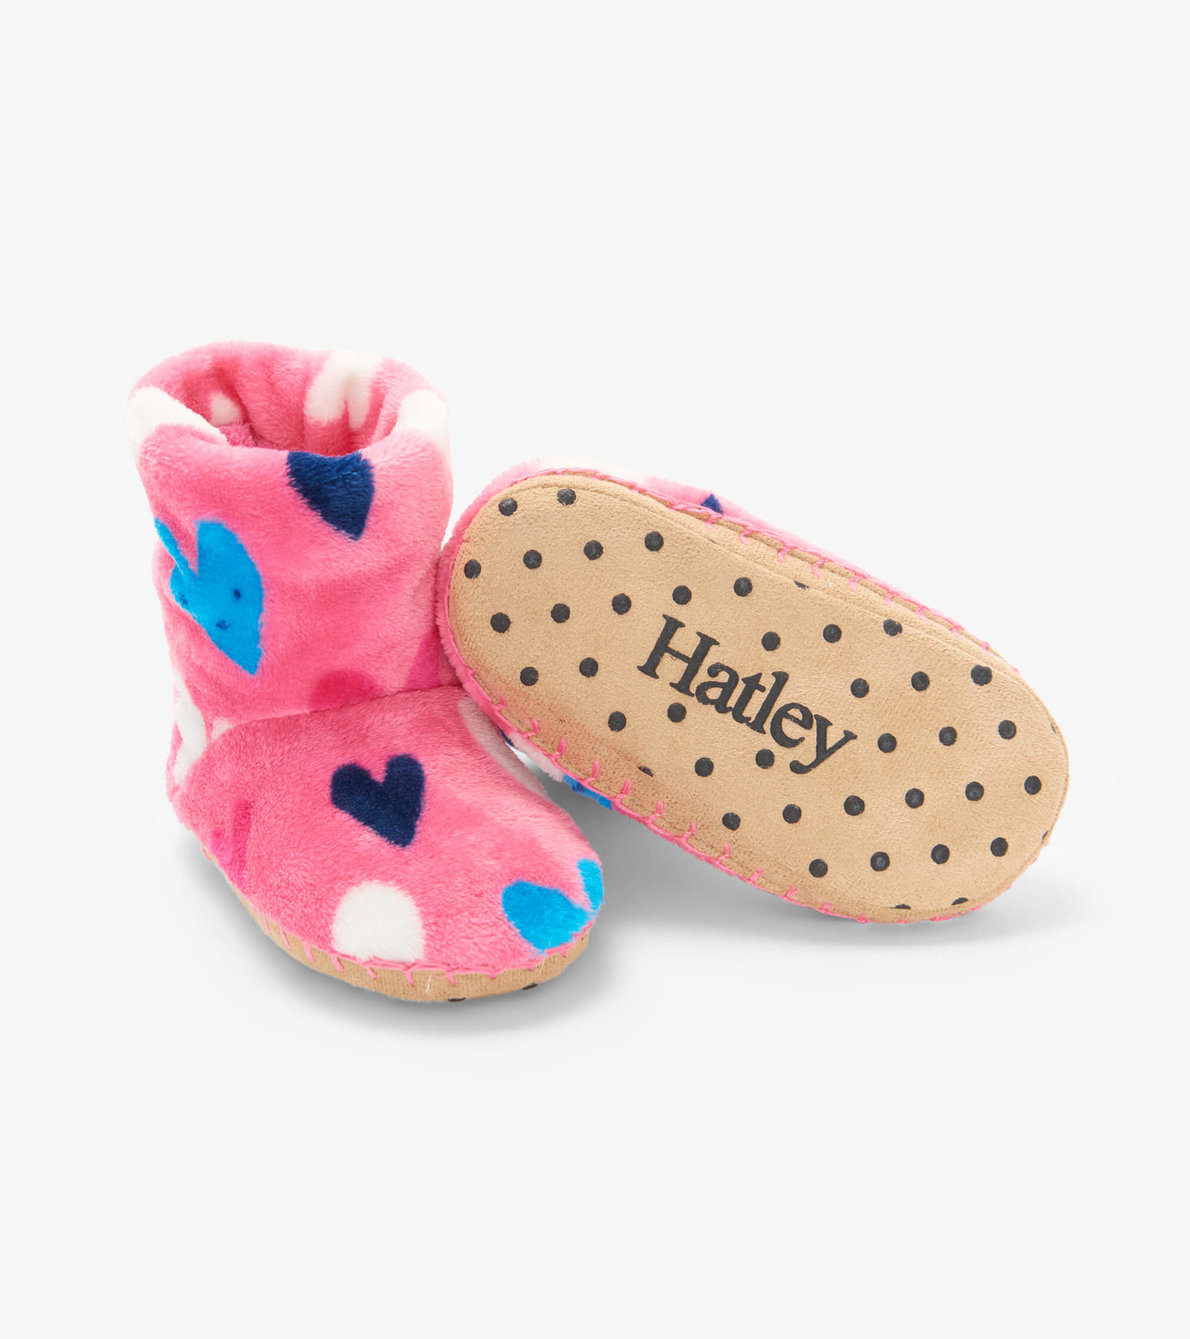 View larger image of Confetti Hearts Kids Fleece Slippers